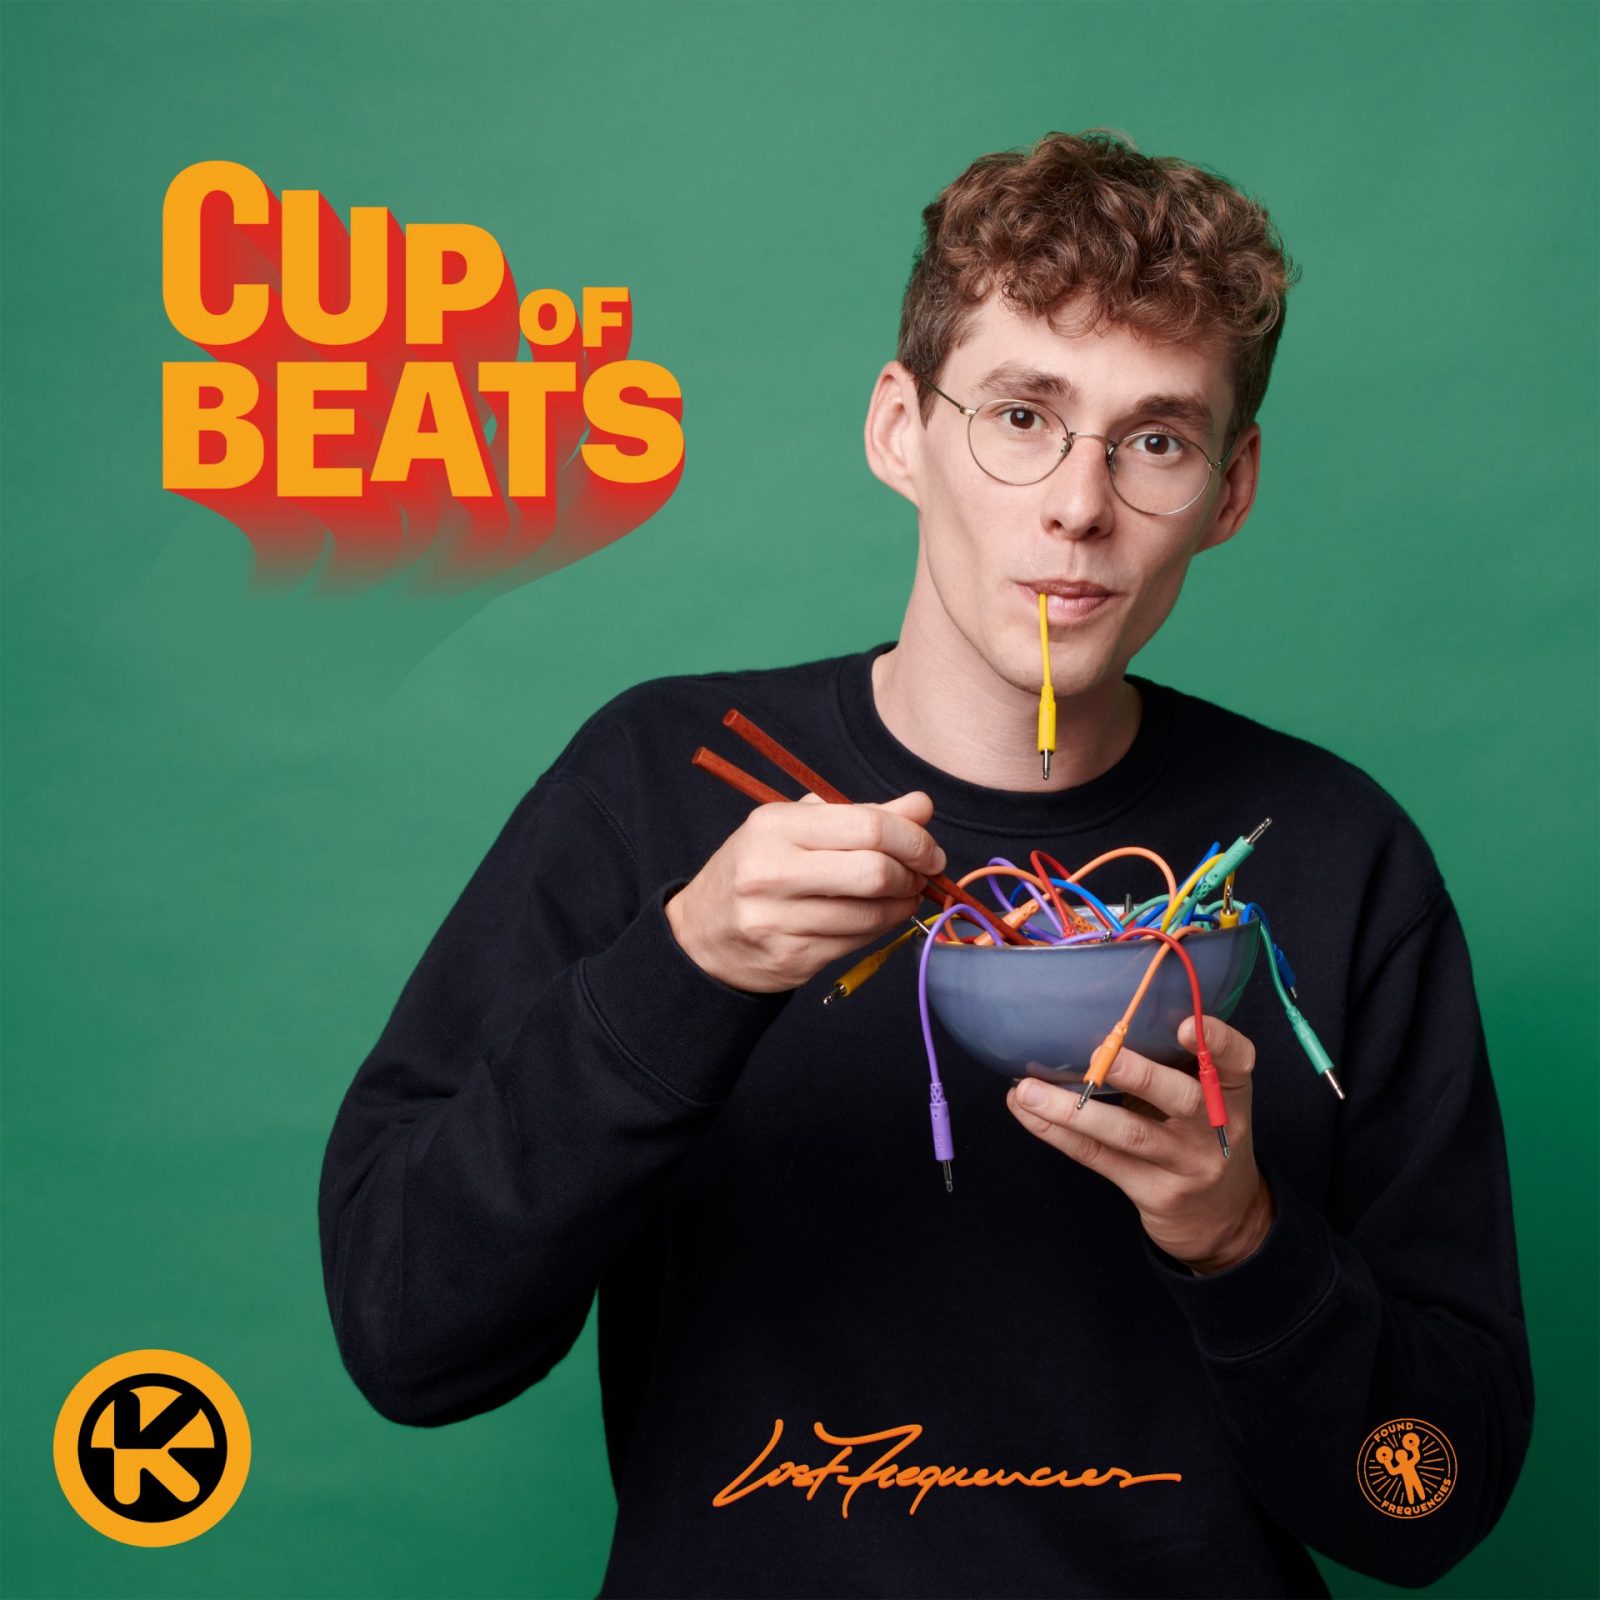 LOST FREQUENCIES’ “CUP OF BEATS EP” inkl. Hitsingle “DON’T LEAVE ME” 